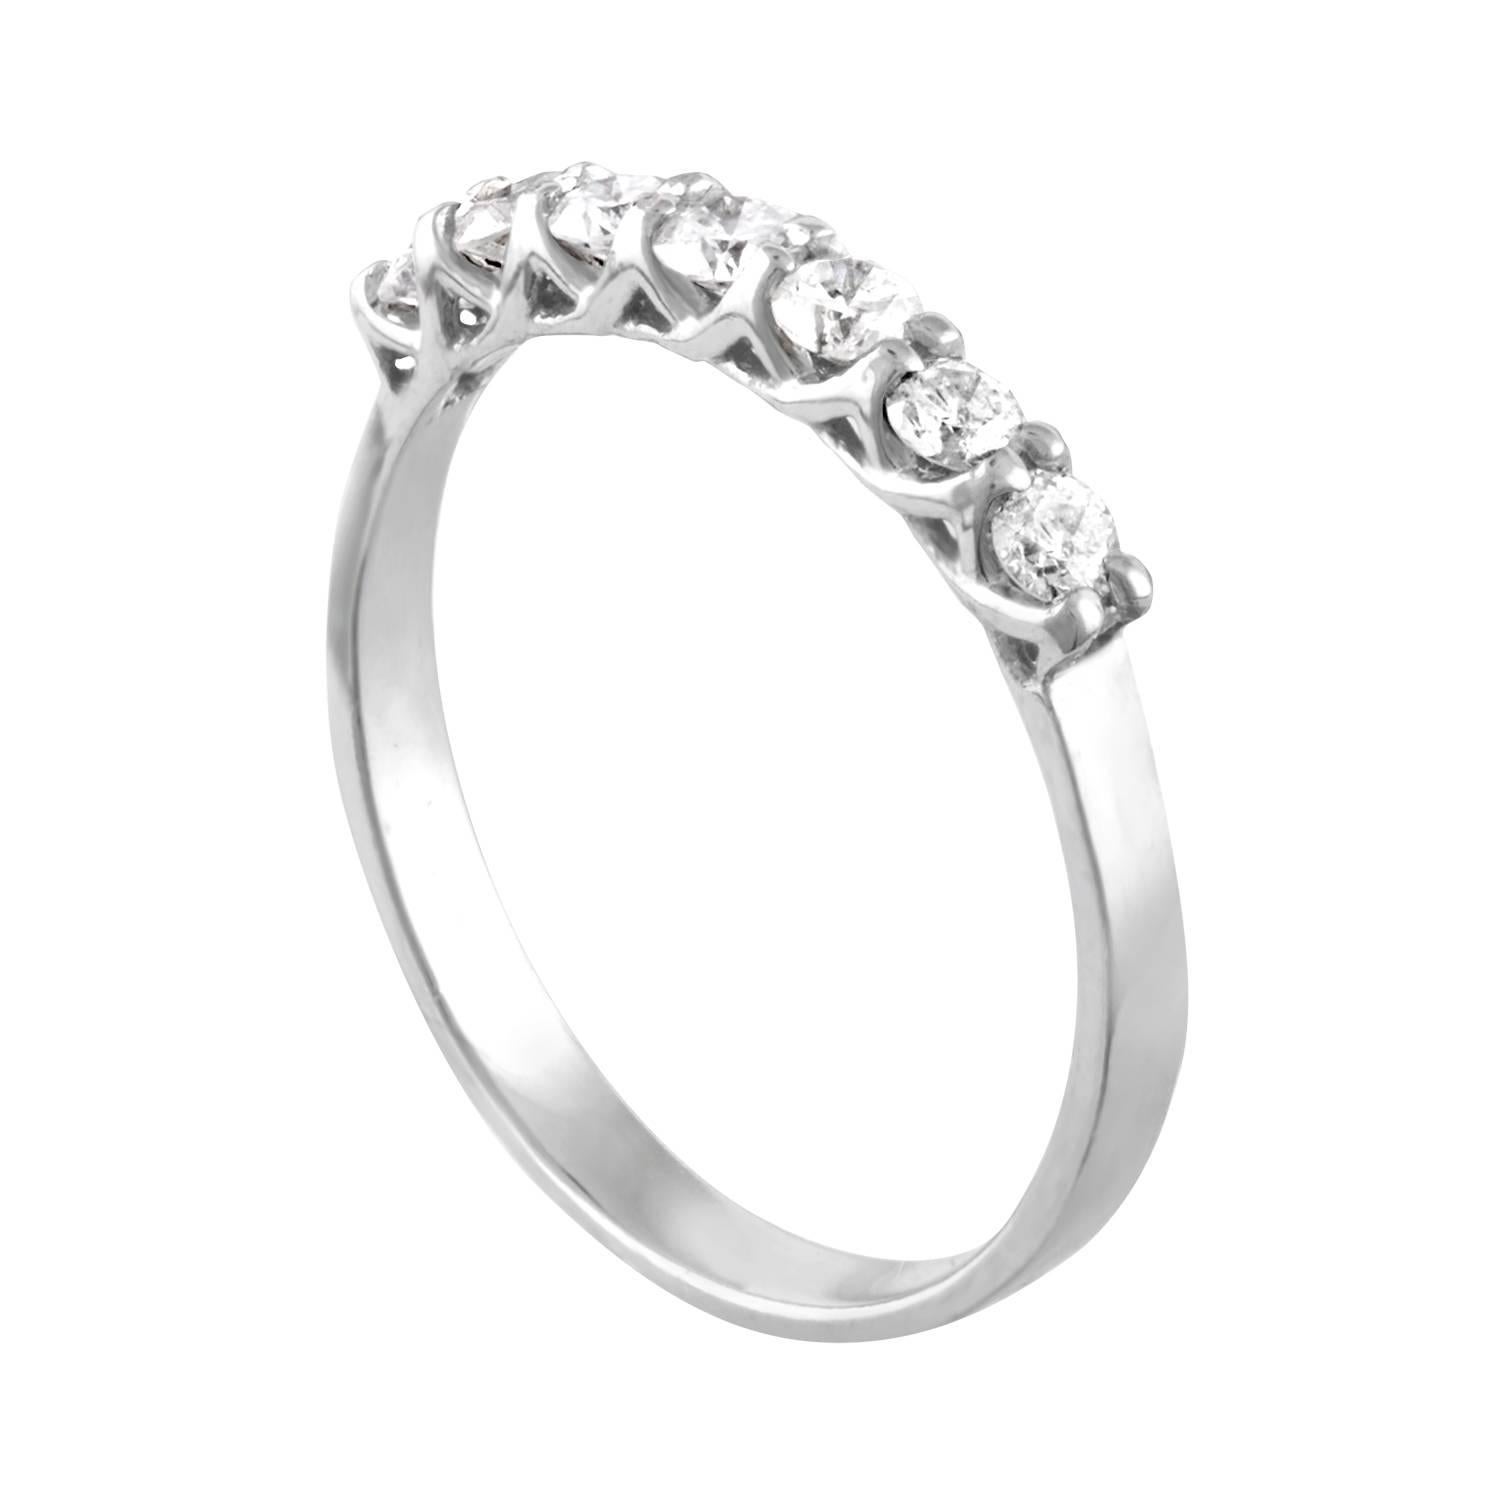 Delicate Seven-Stone Ring Great For Stacking
The ring is 14K White Gold
There are 0.25 Carats in Diamonds H I3
The ring is a size 5.5, sizable
The ring weighs 1.3 grams